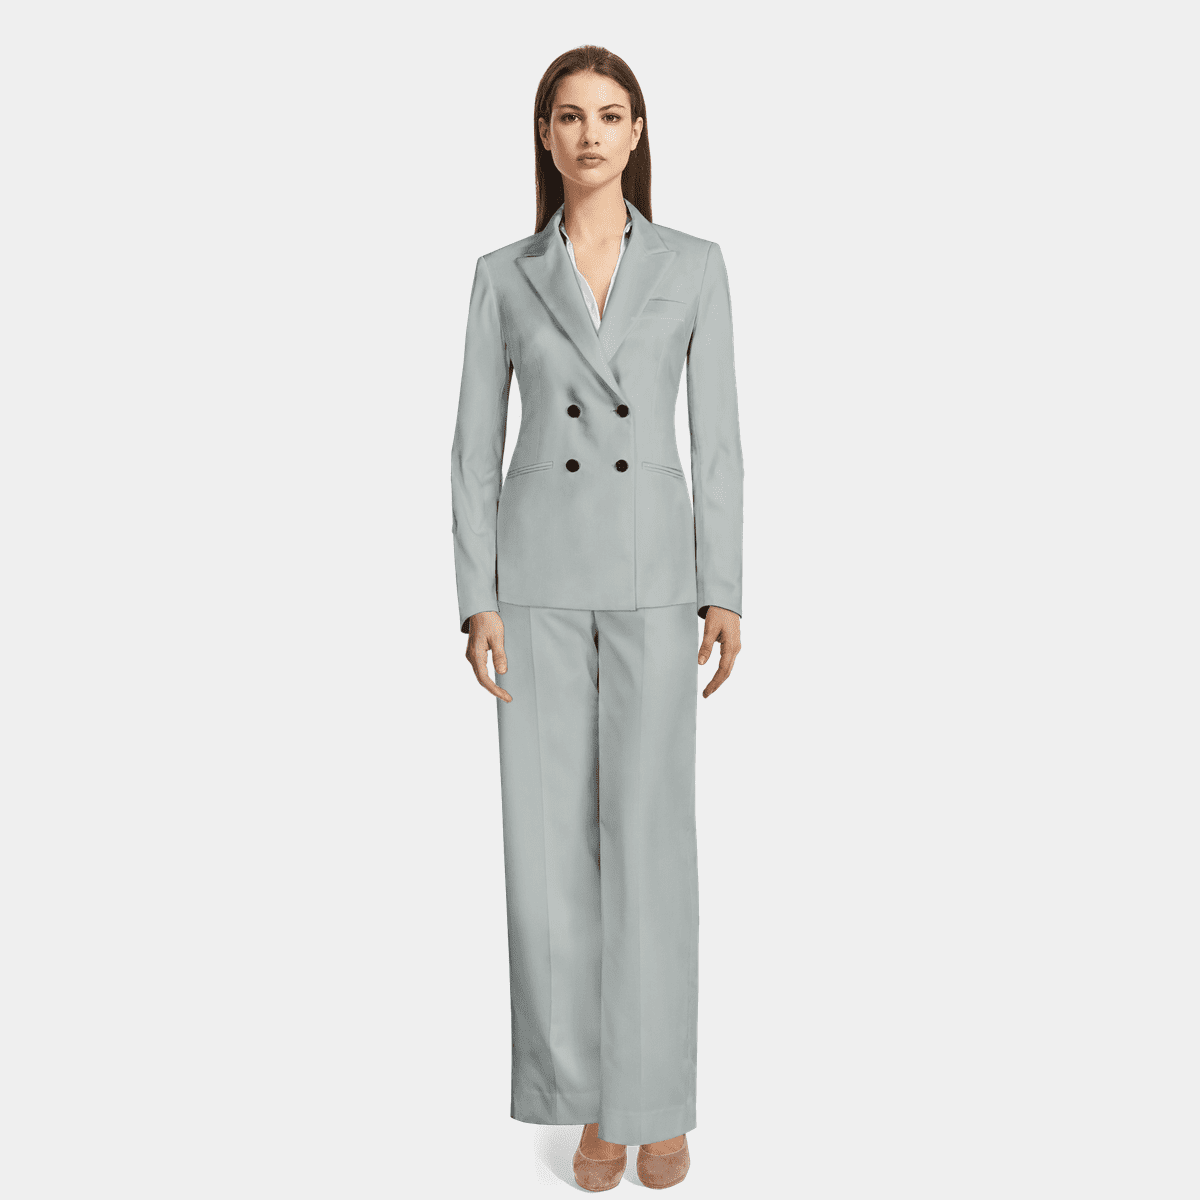 Light Blue double breasted Wide Leg Pant Suit